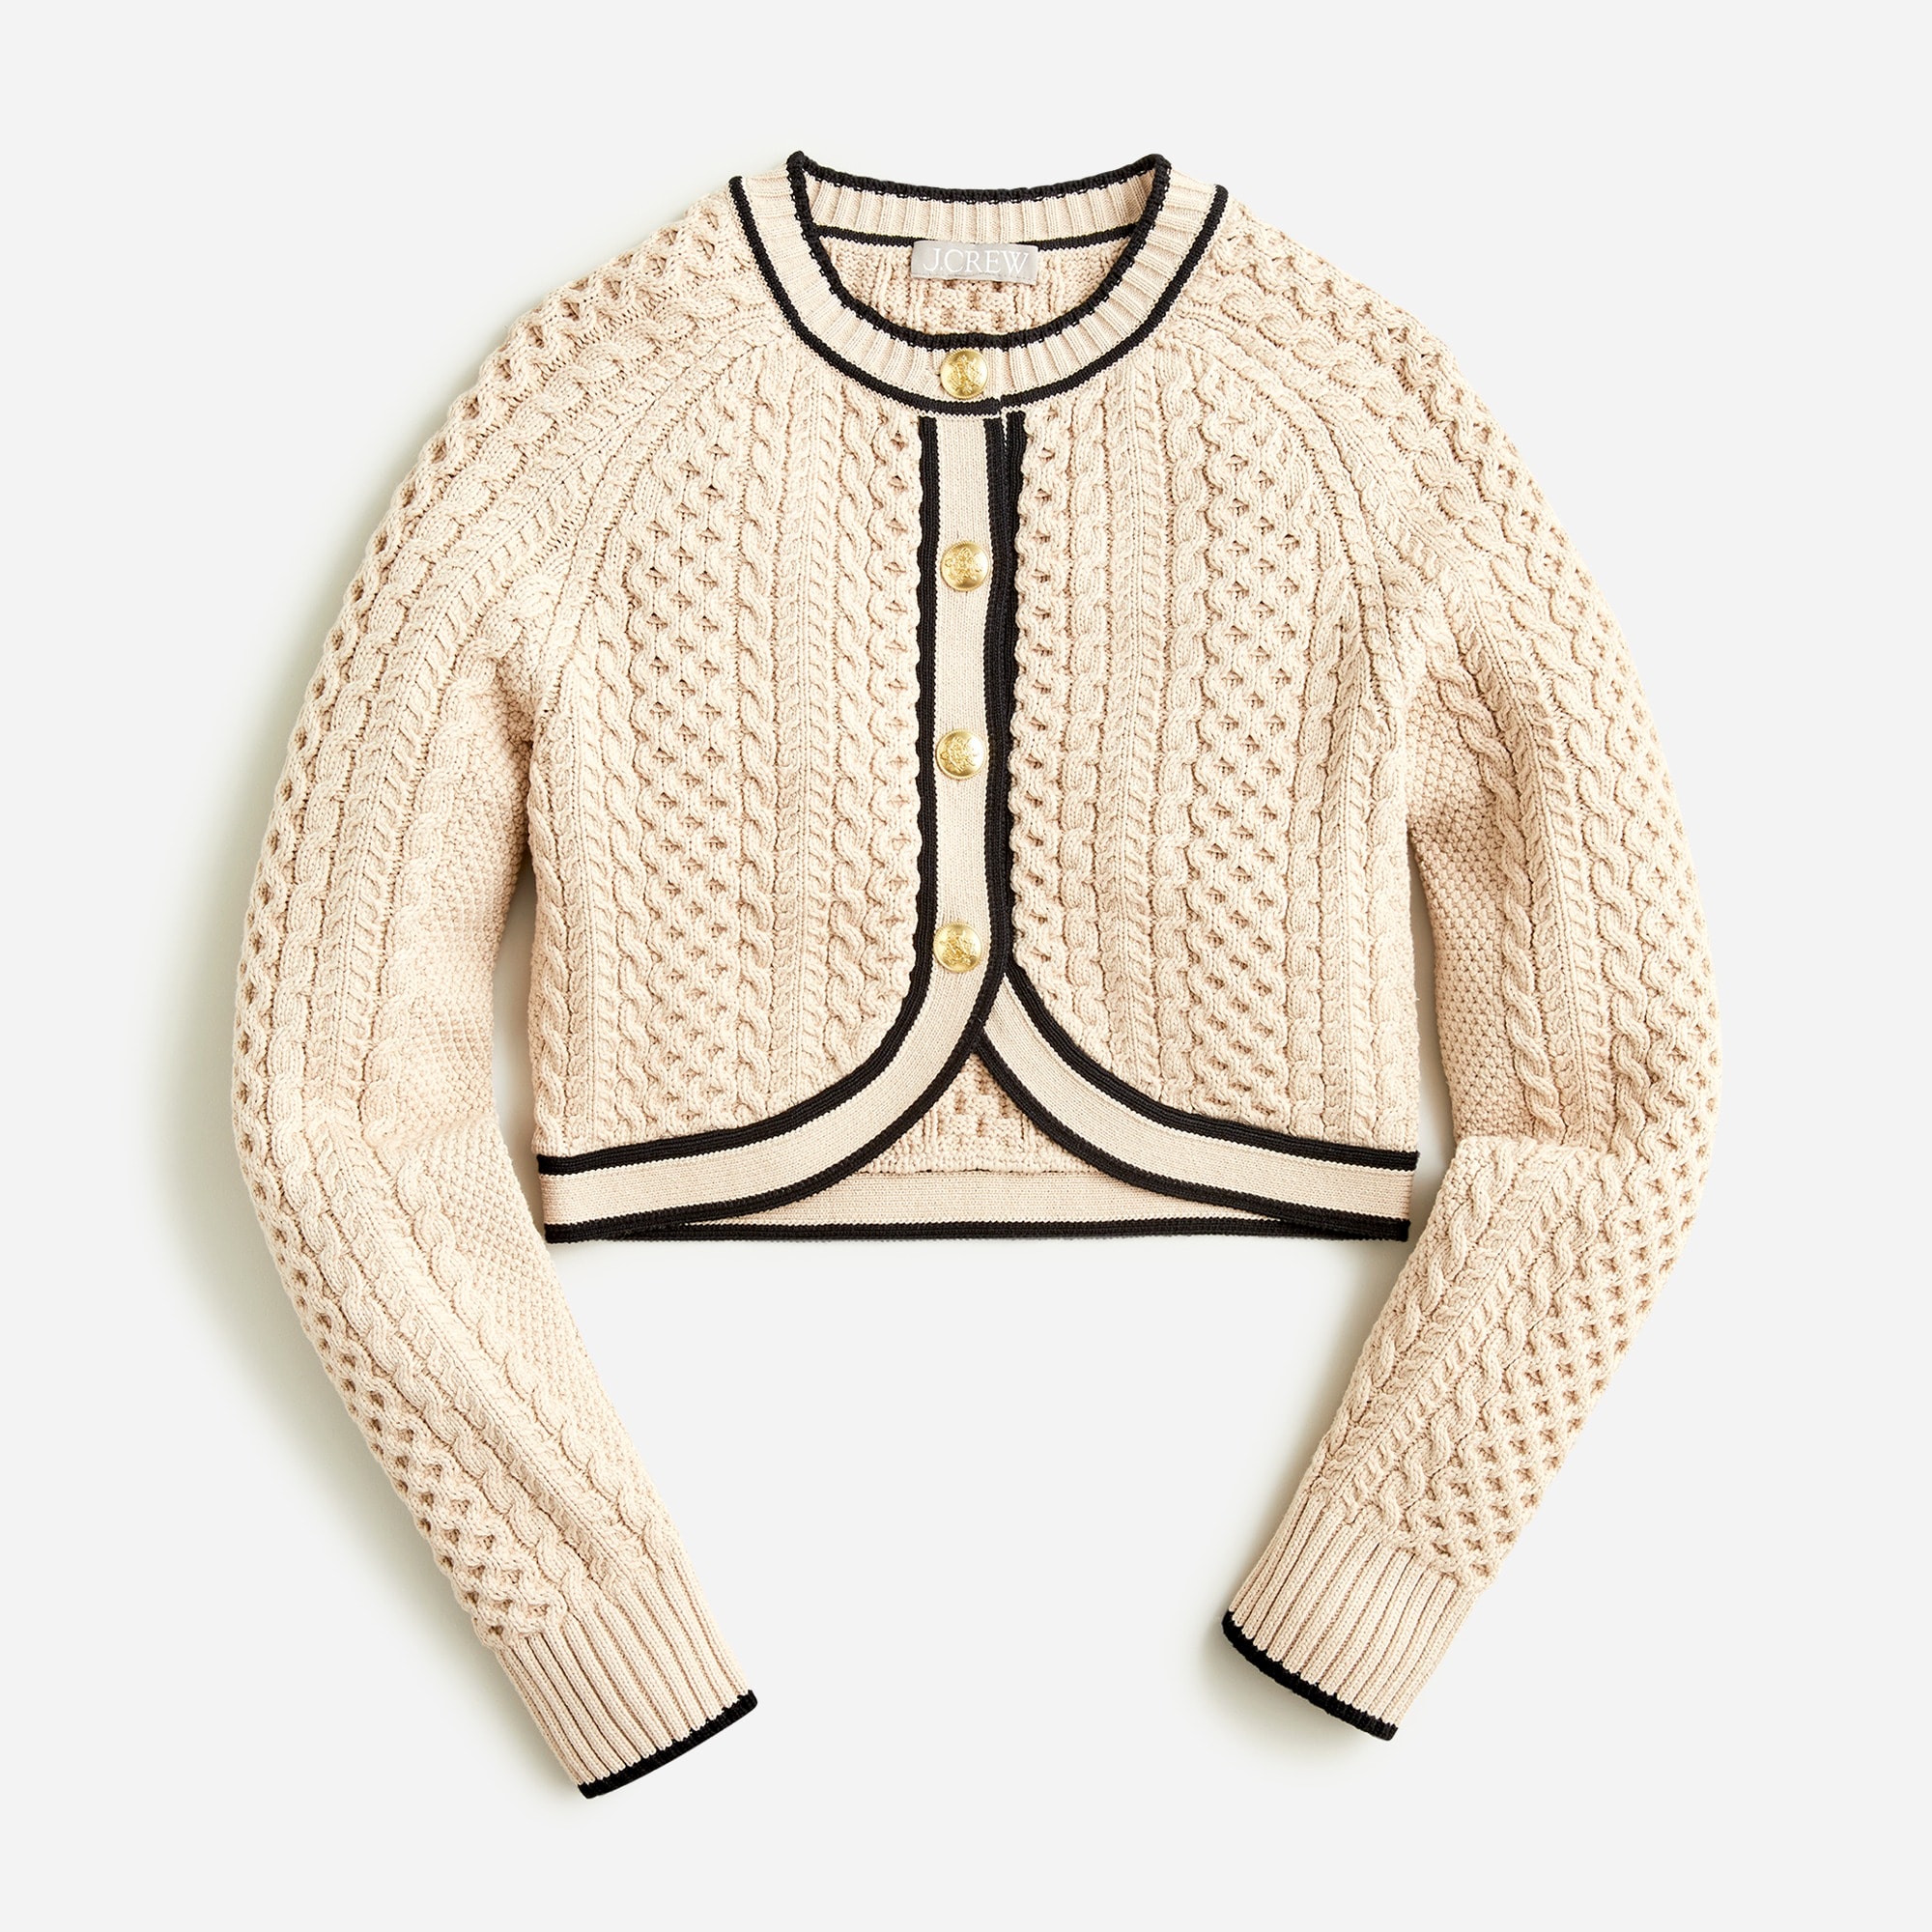 J.Crew Women's Cable-Knit Cardigan Sweater